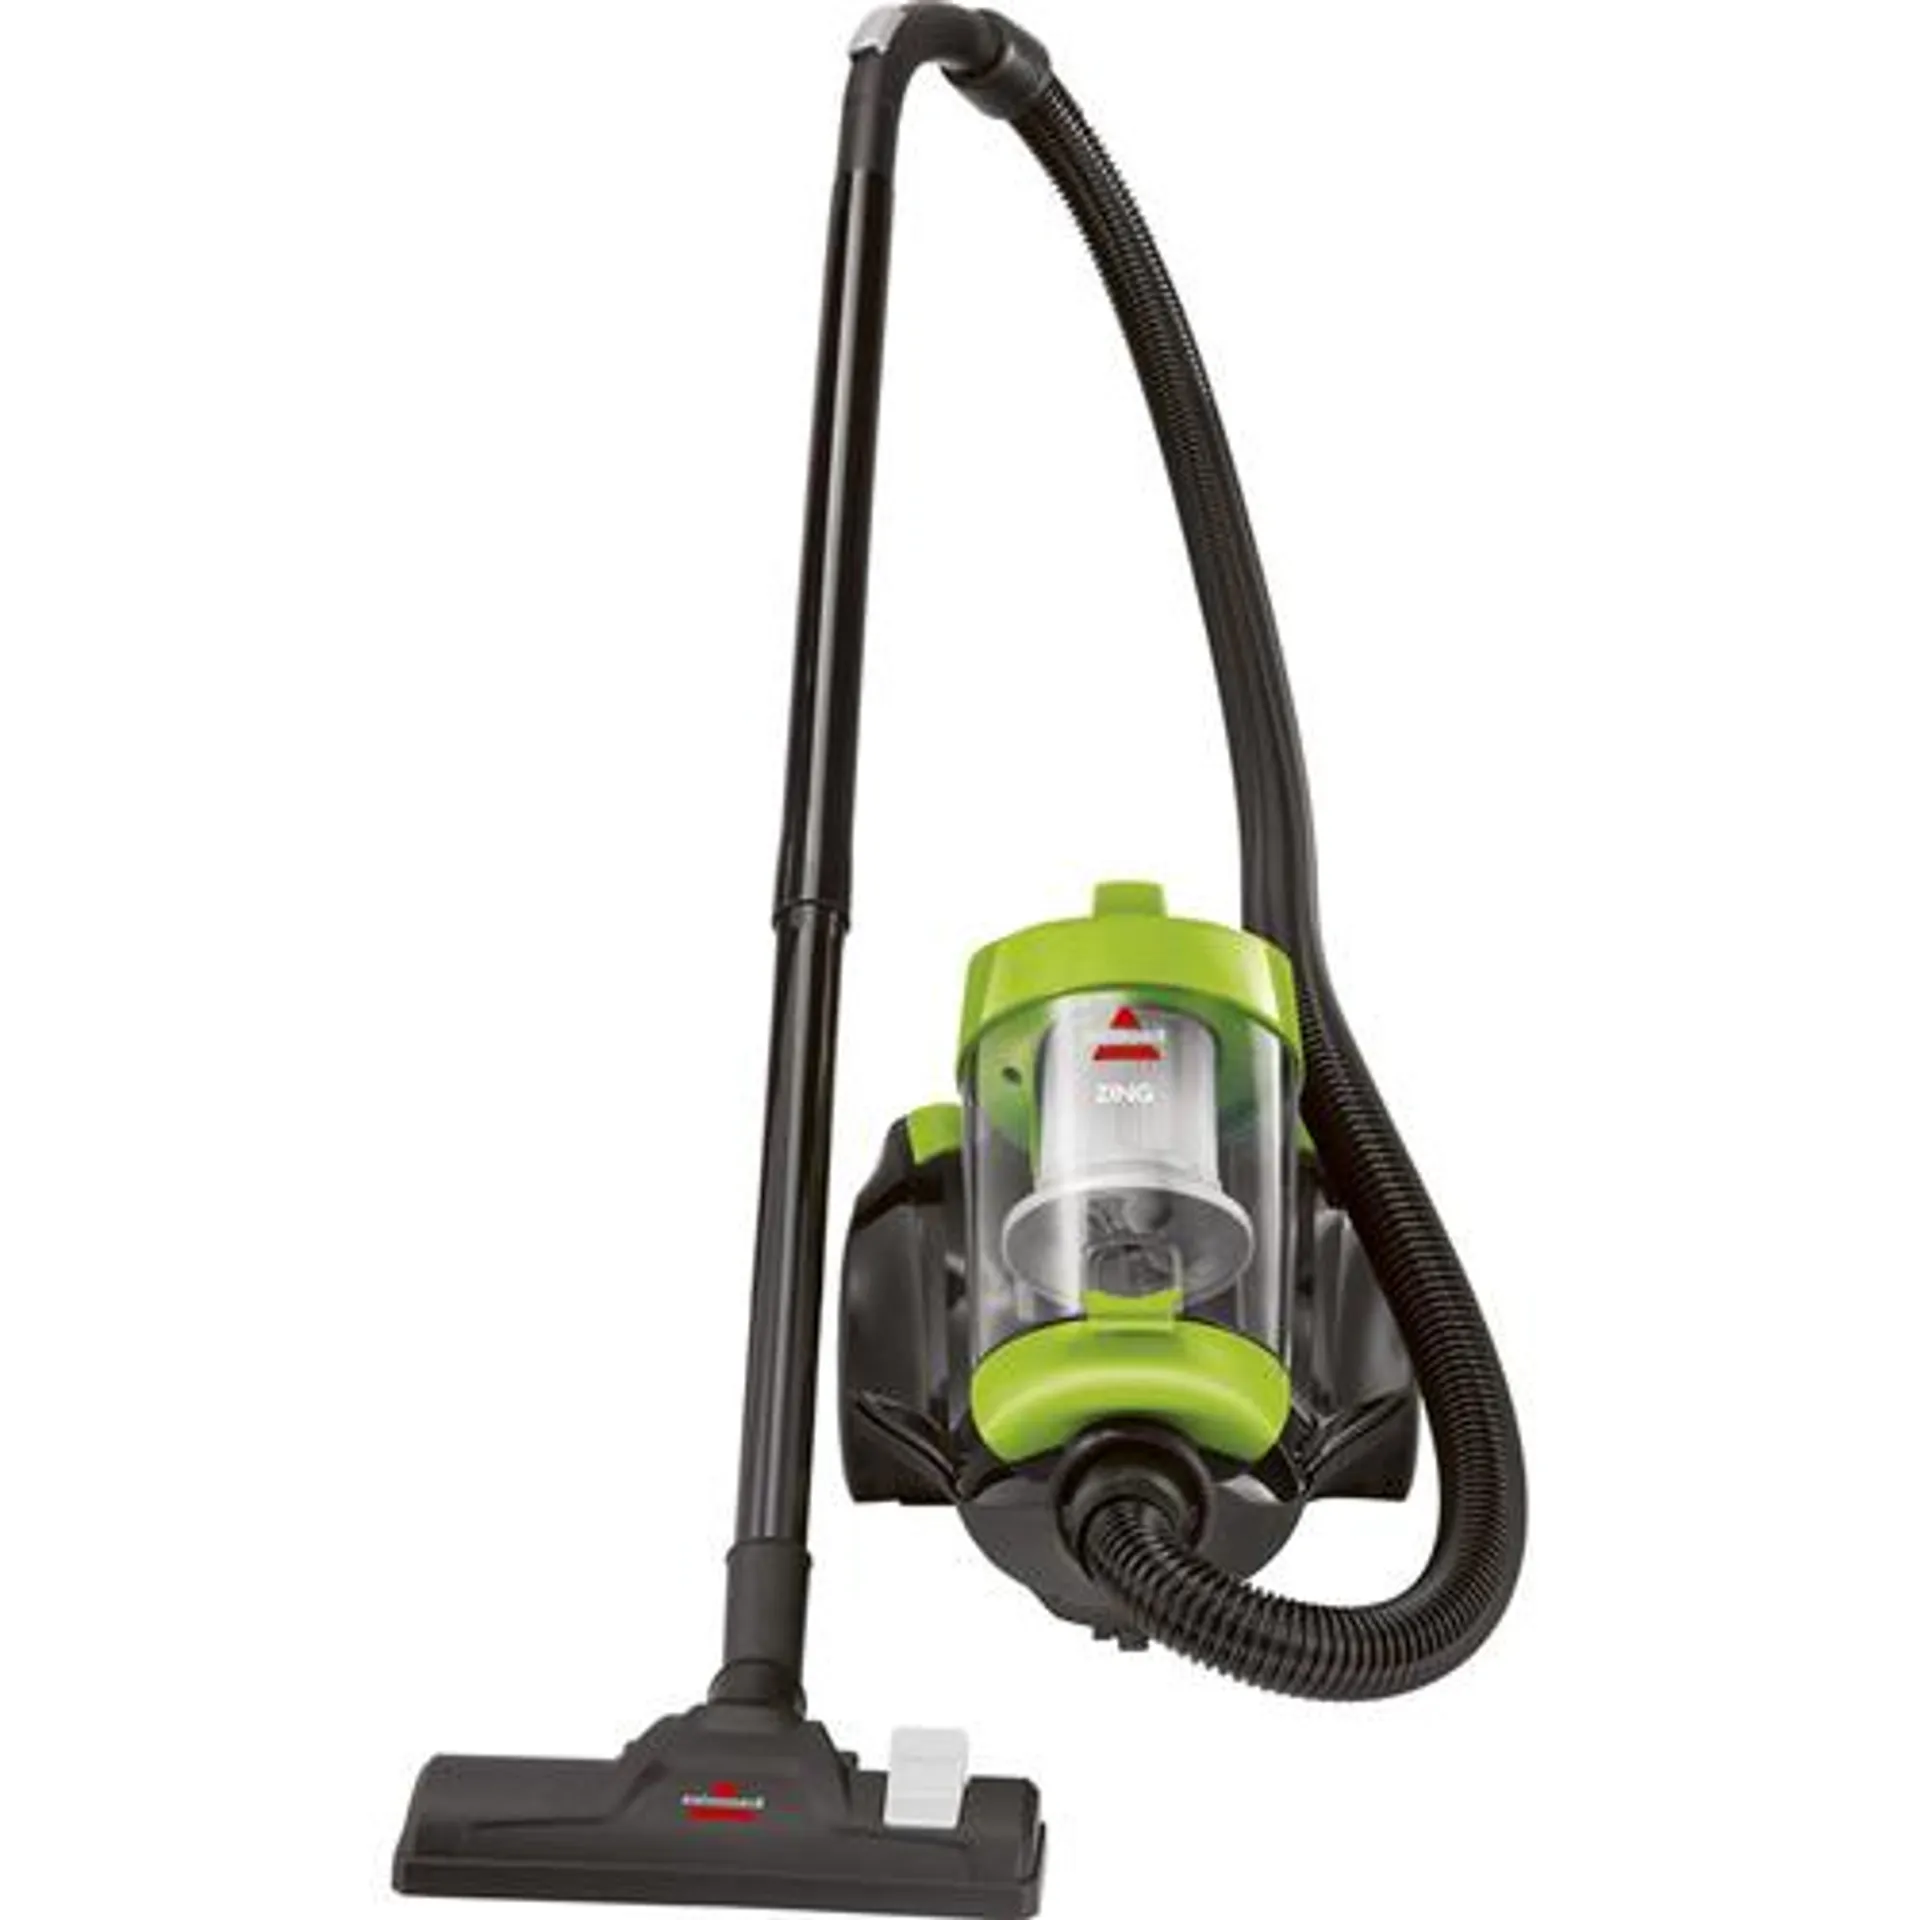 Zing® Bagless Canister Vacuum